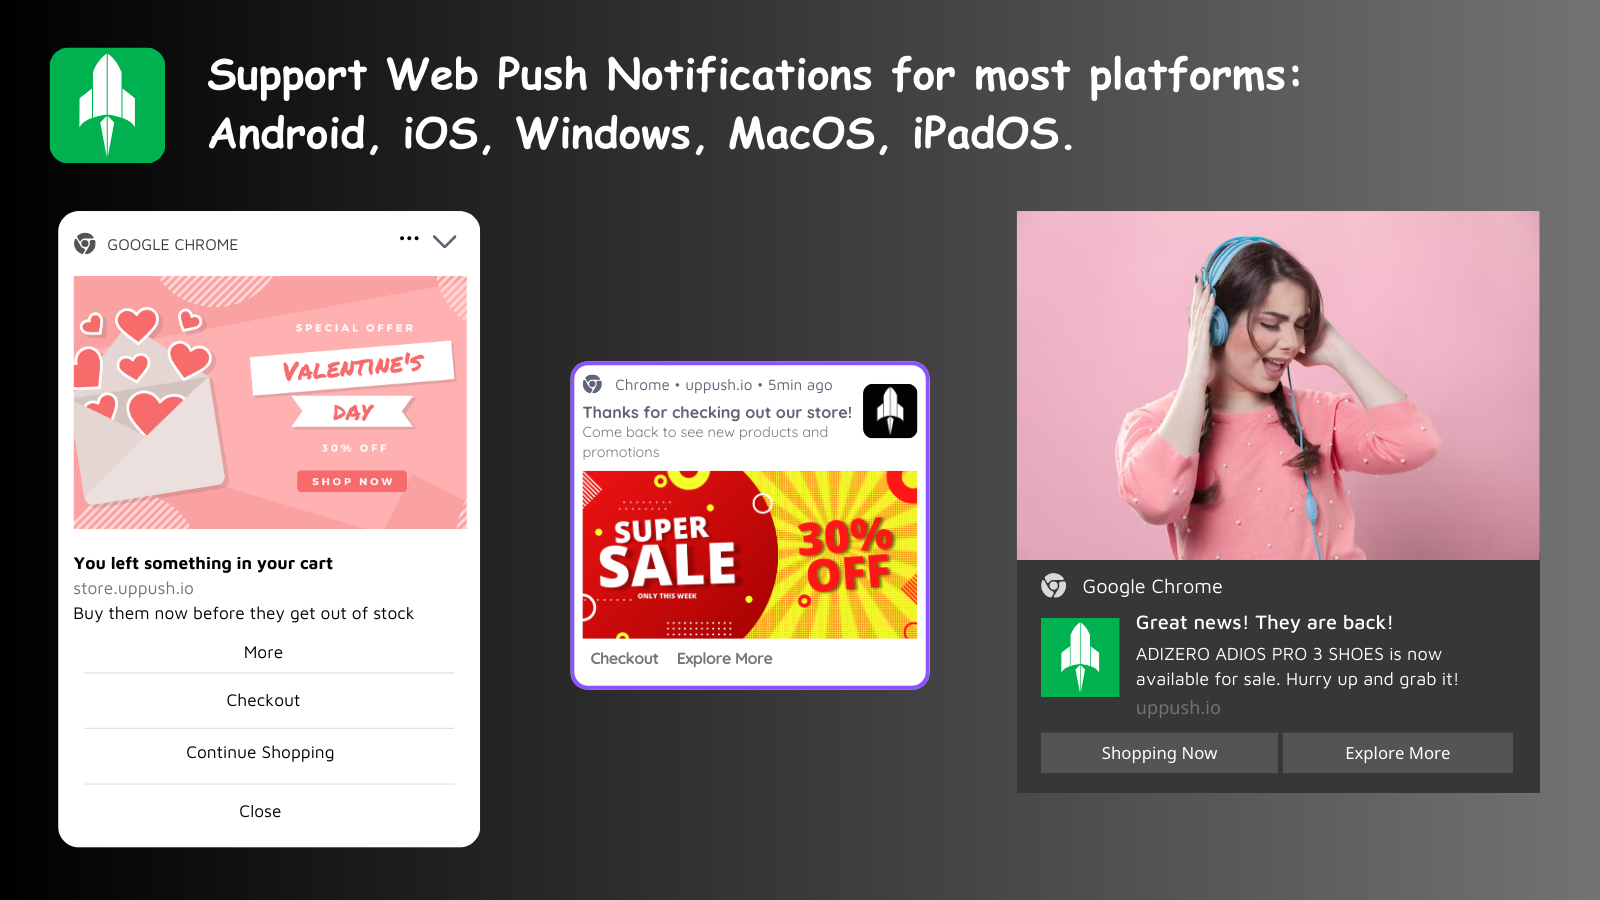 Support Web Push Notification for most platforms